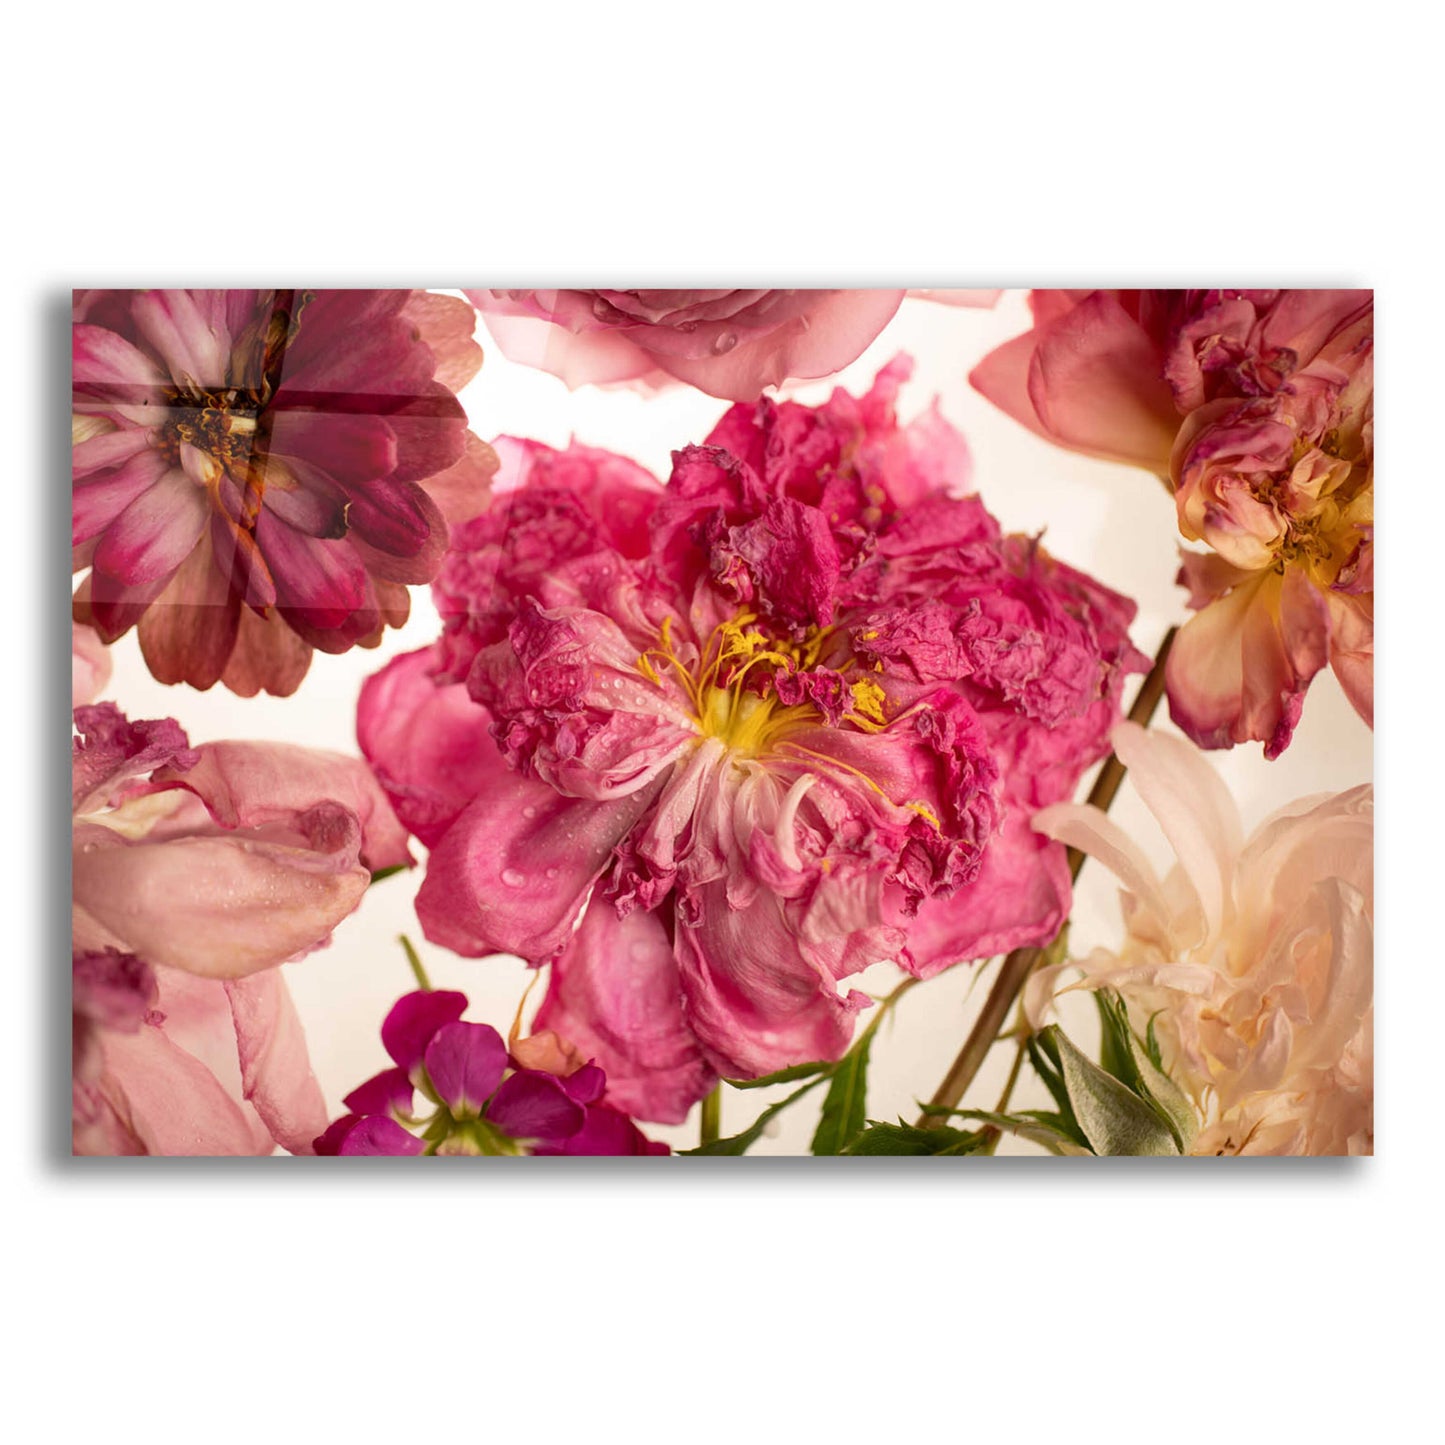 Epic Art 'Peony on White' by Leah McLean, Acrylic Glass Wall Art,16x12